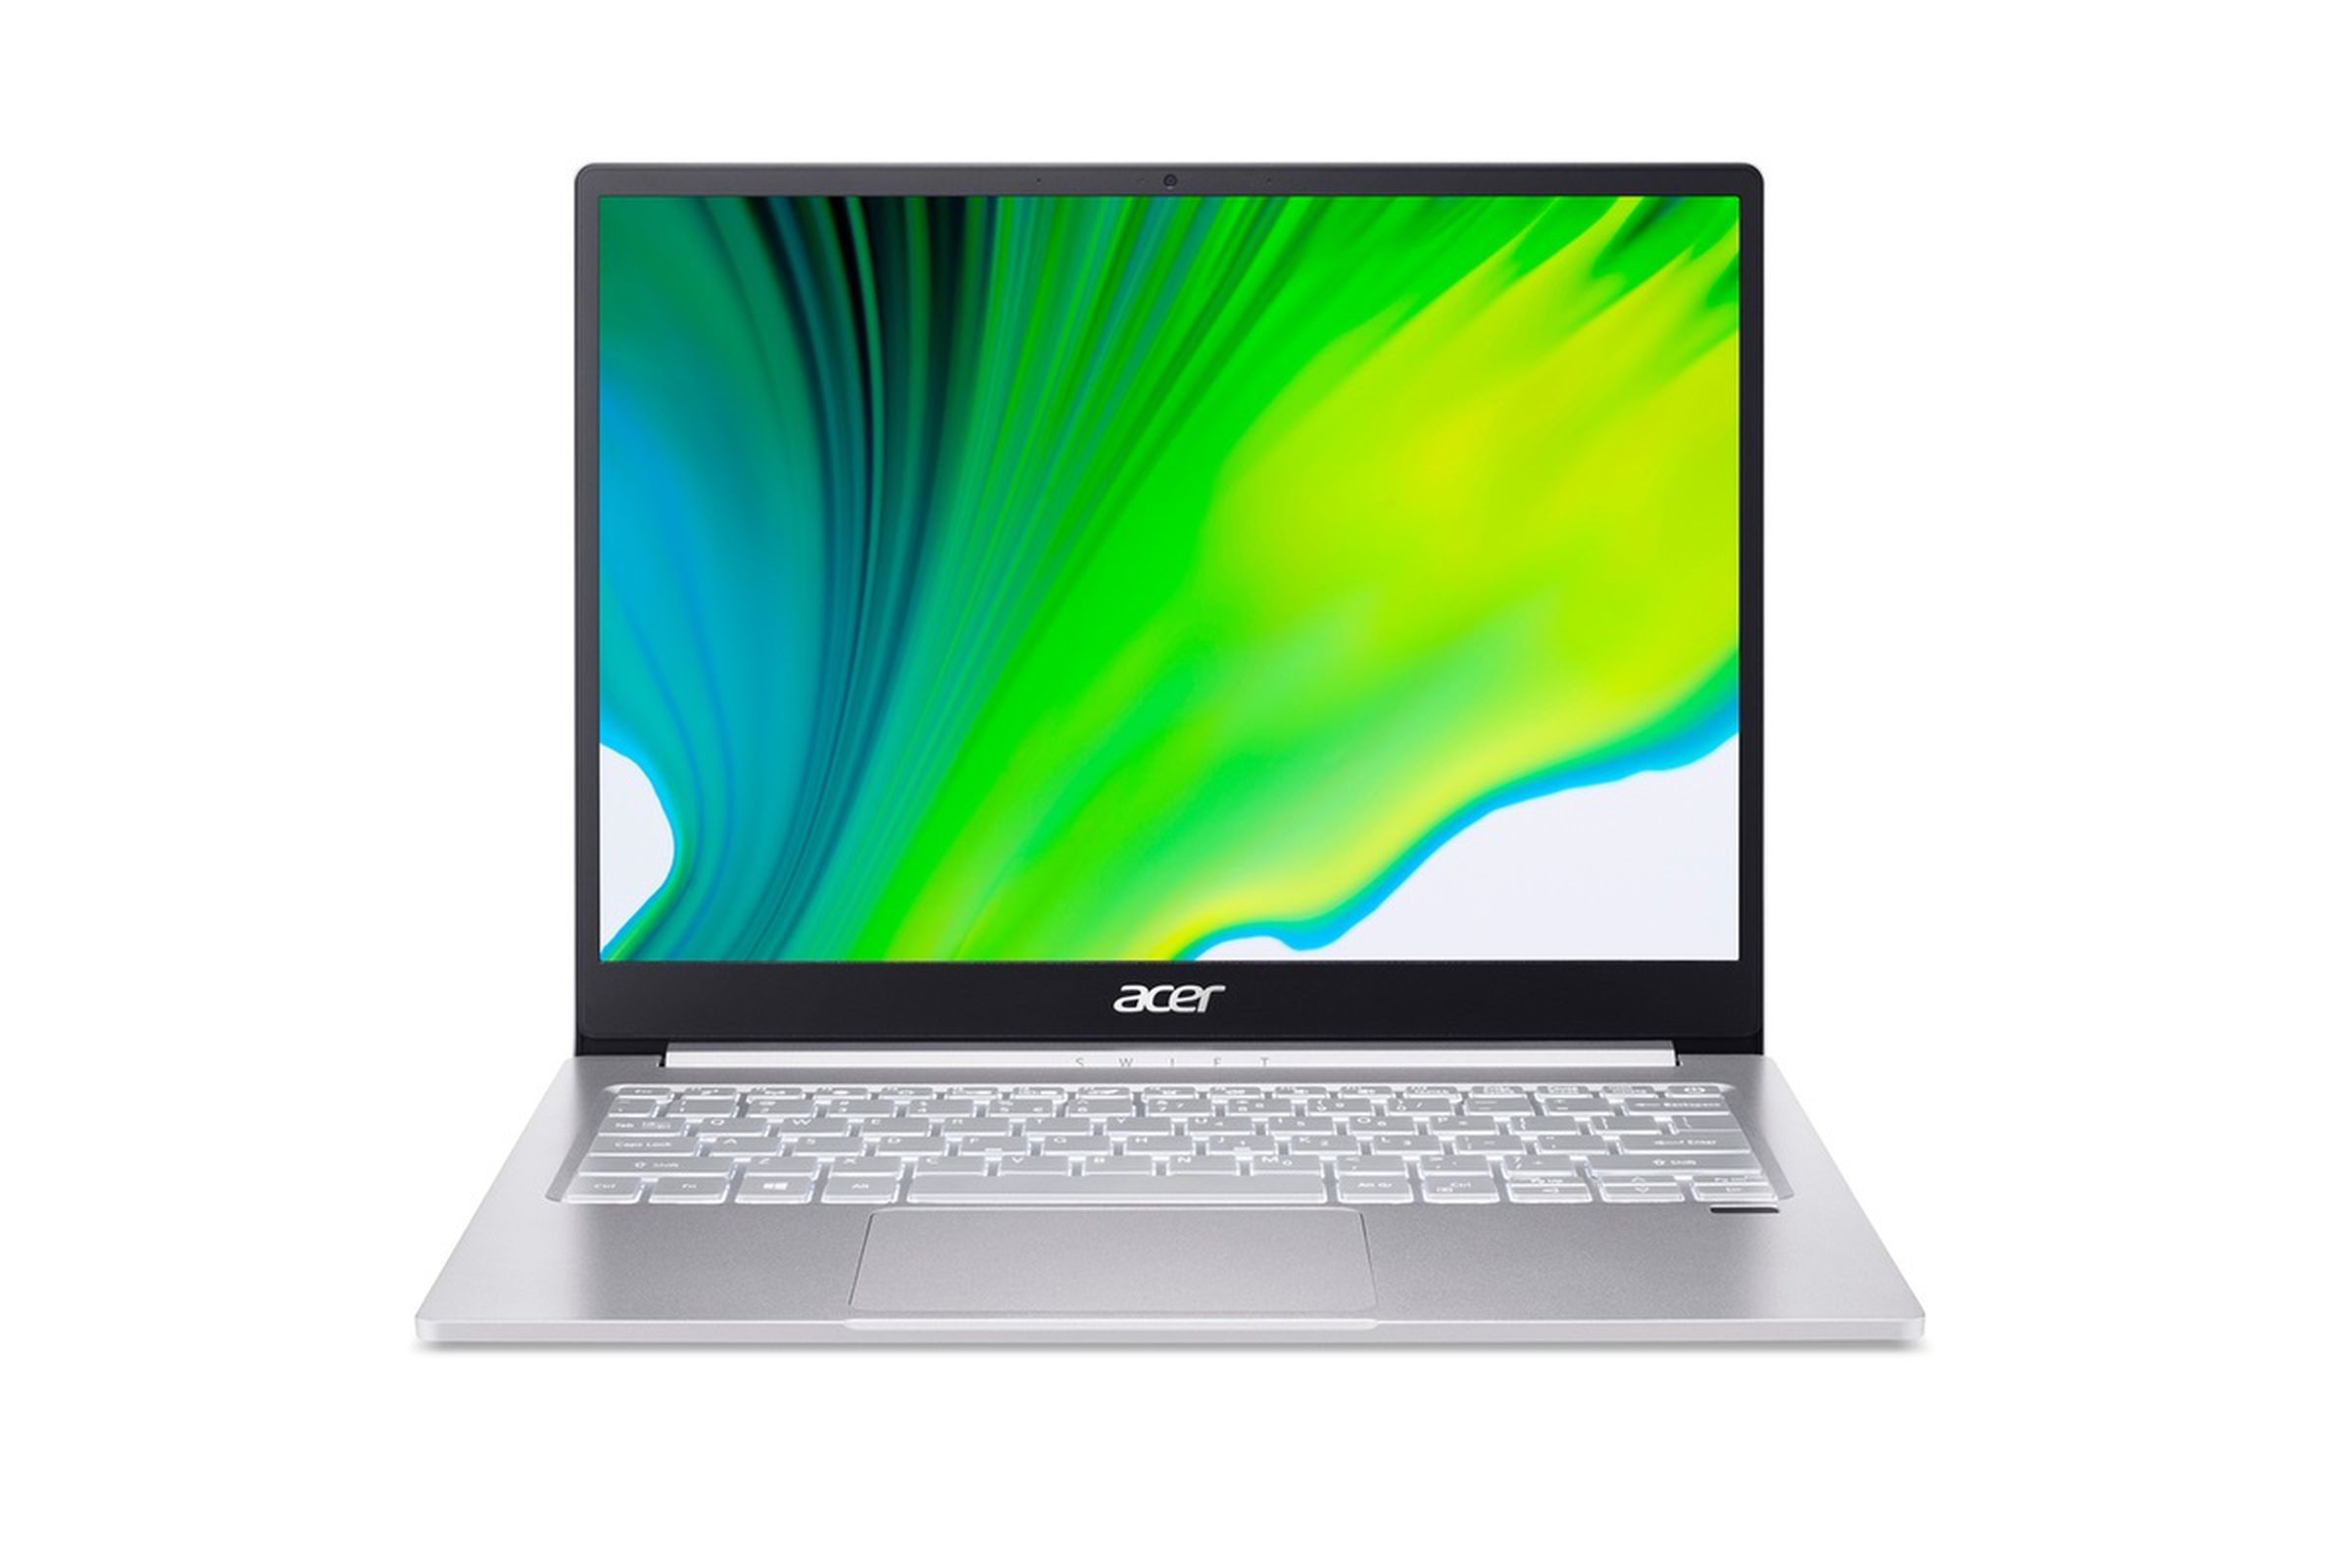 Acer Swift 3 SF313-53 from the front.